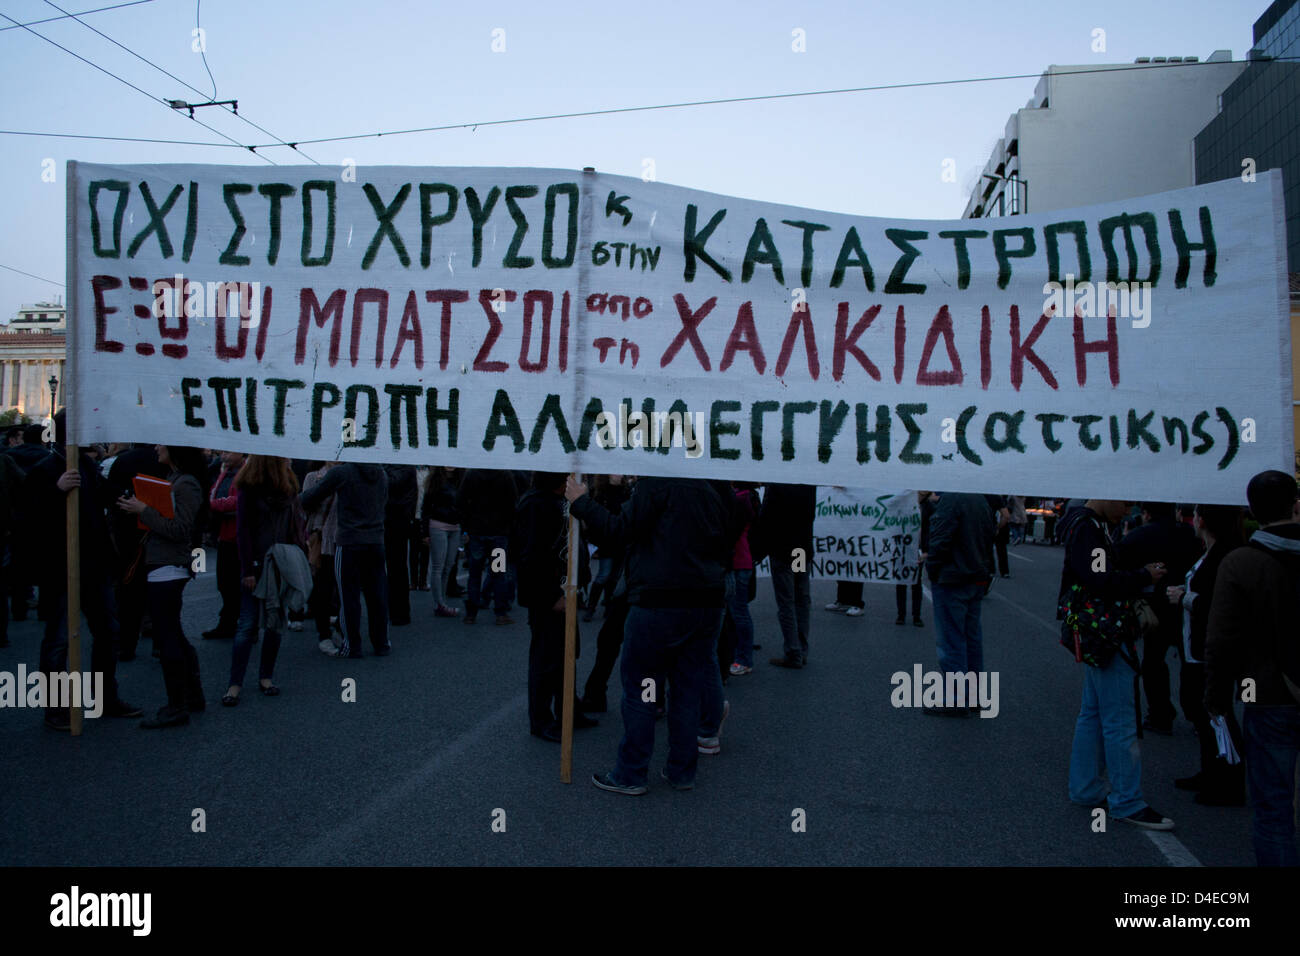 Athens, Greece. 12th March 2013. A demonstration is staged in solidarity with northern Greece, Chalkidiki residents who have been opposing gold mining projects in their area. People marched shouting slogans against Hellenic Gold Company and  repression of activists by the police. Credit:  Nikolas Georgiou / Alamy Live News Stock Photo